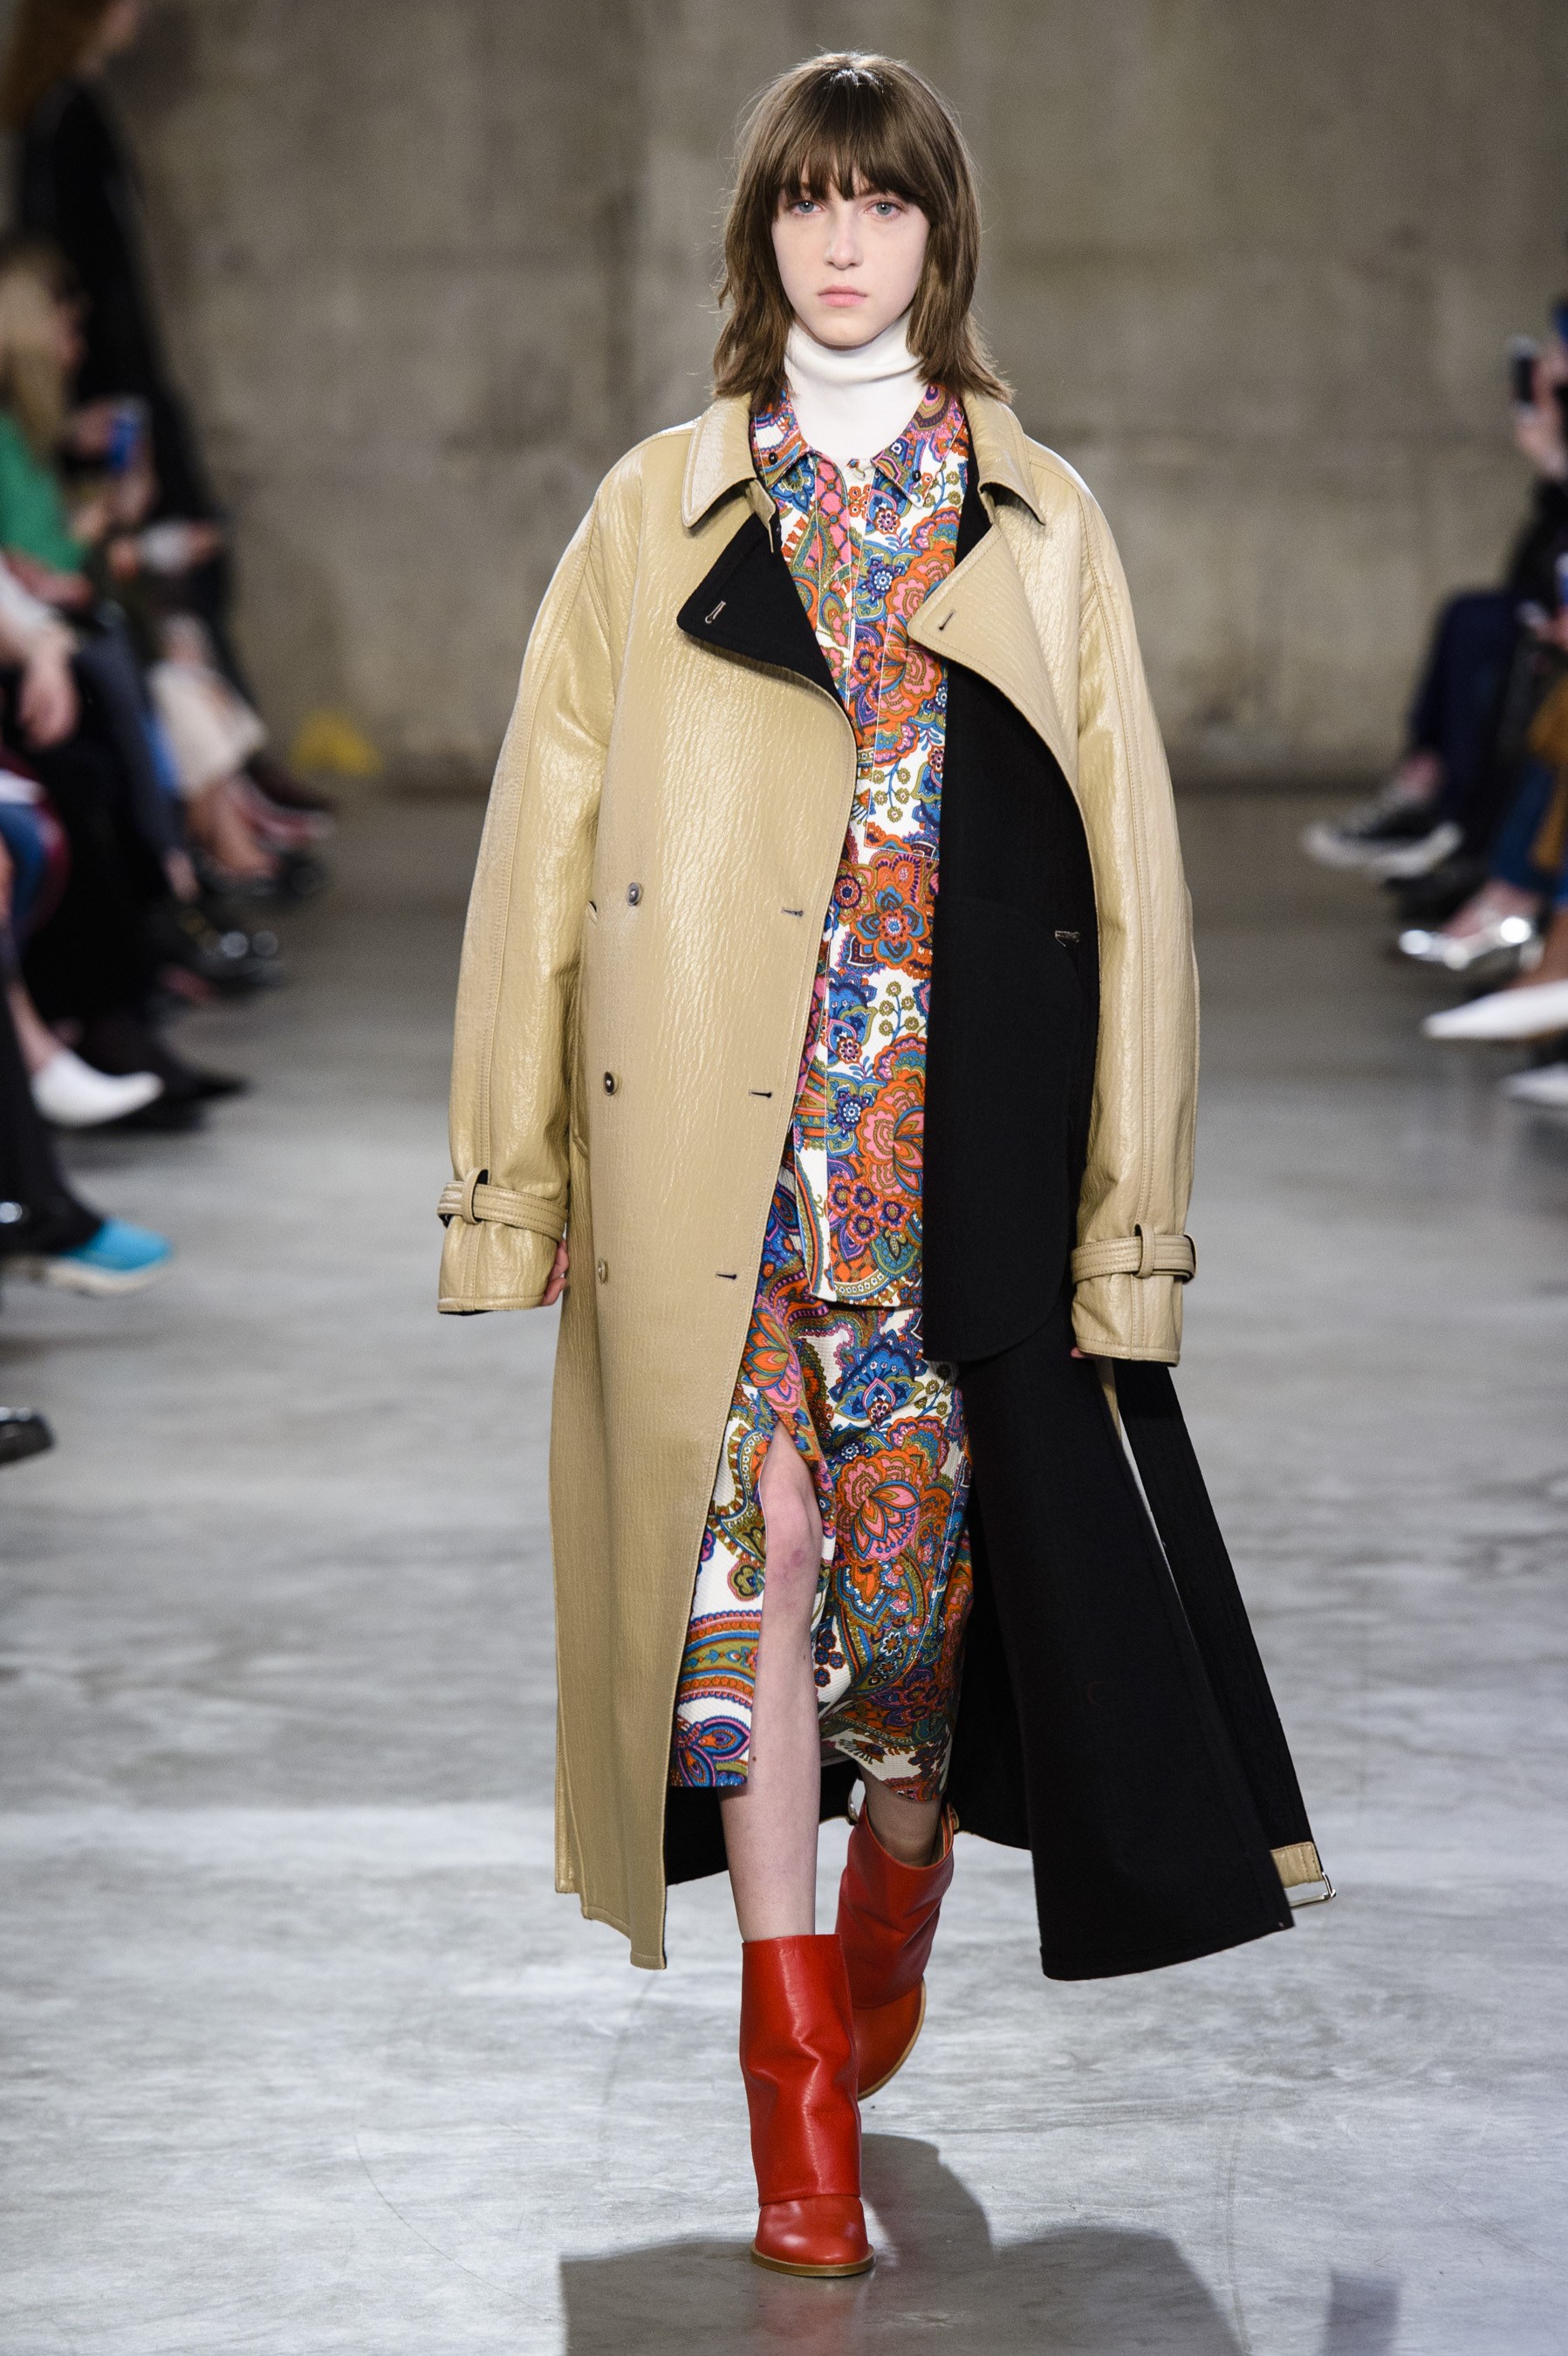 Top 10 London Collections Fall 2018 - The Impression